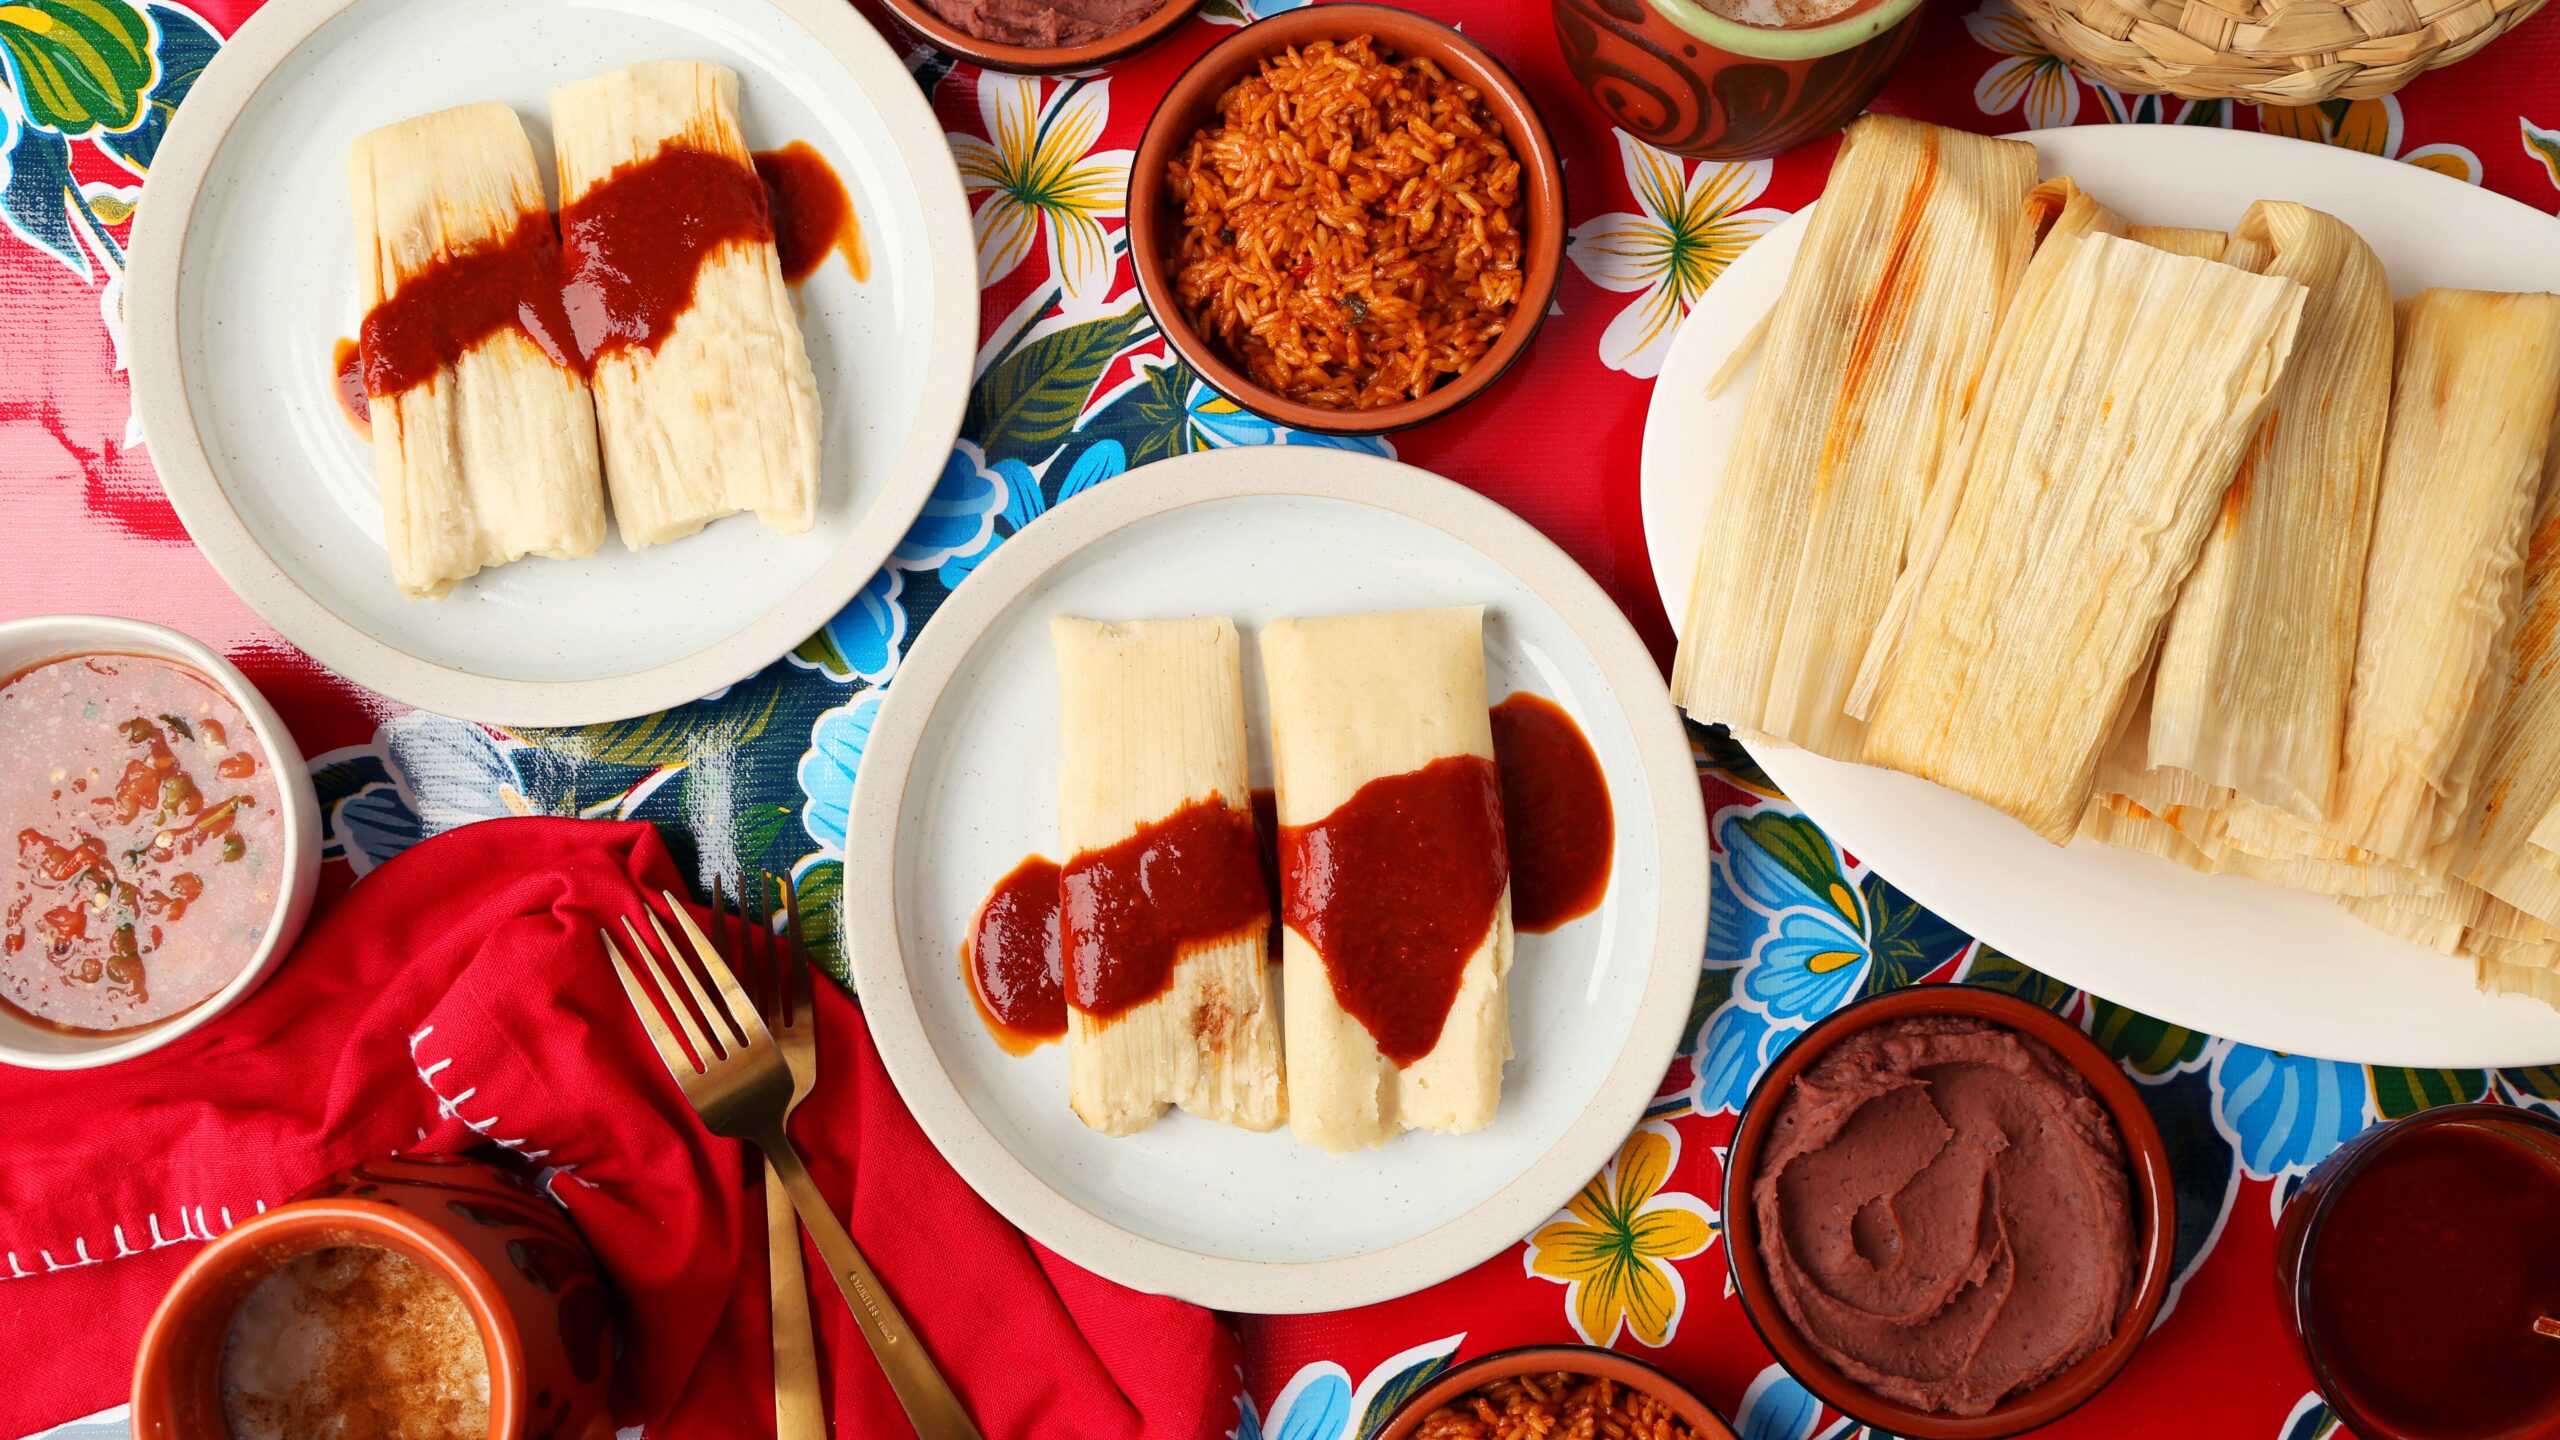  It's not just a tamale, it's a work of art!